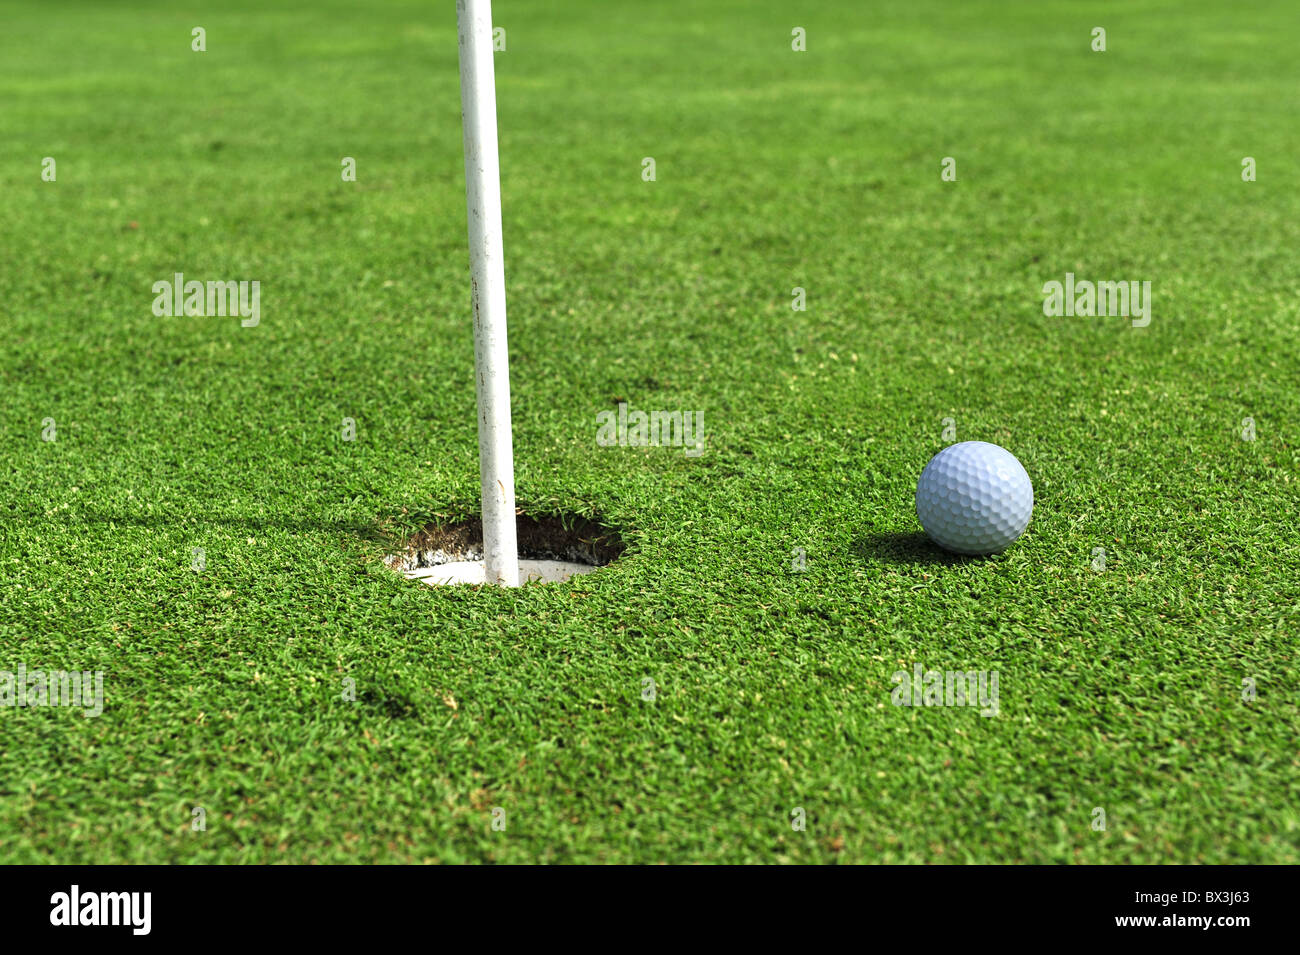 A golf ball has stopped close to the hole ready for an easy tap in. Stock Photo